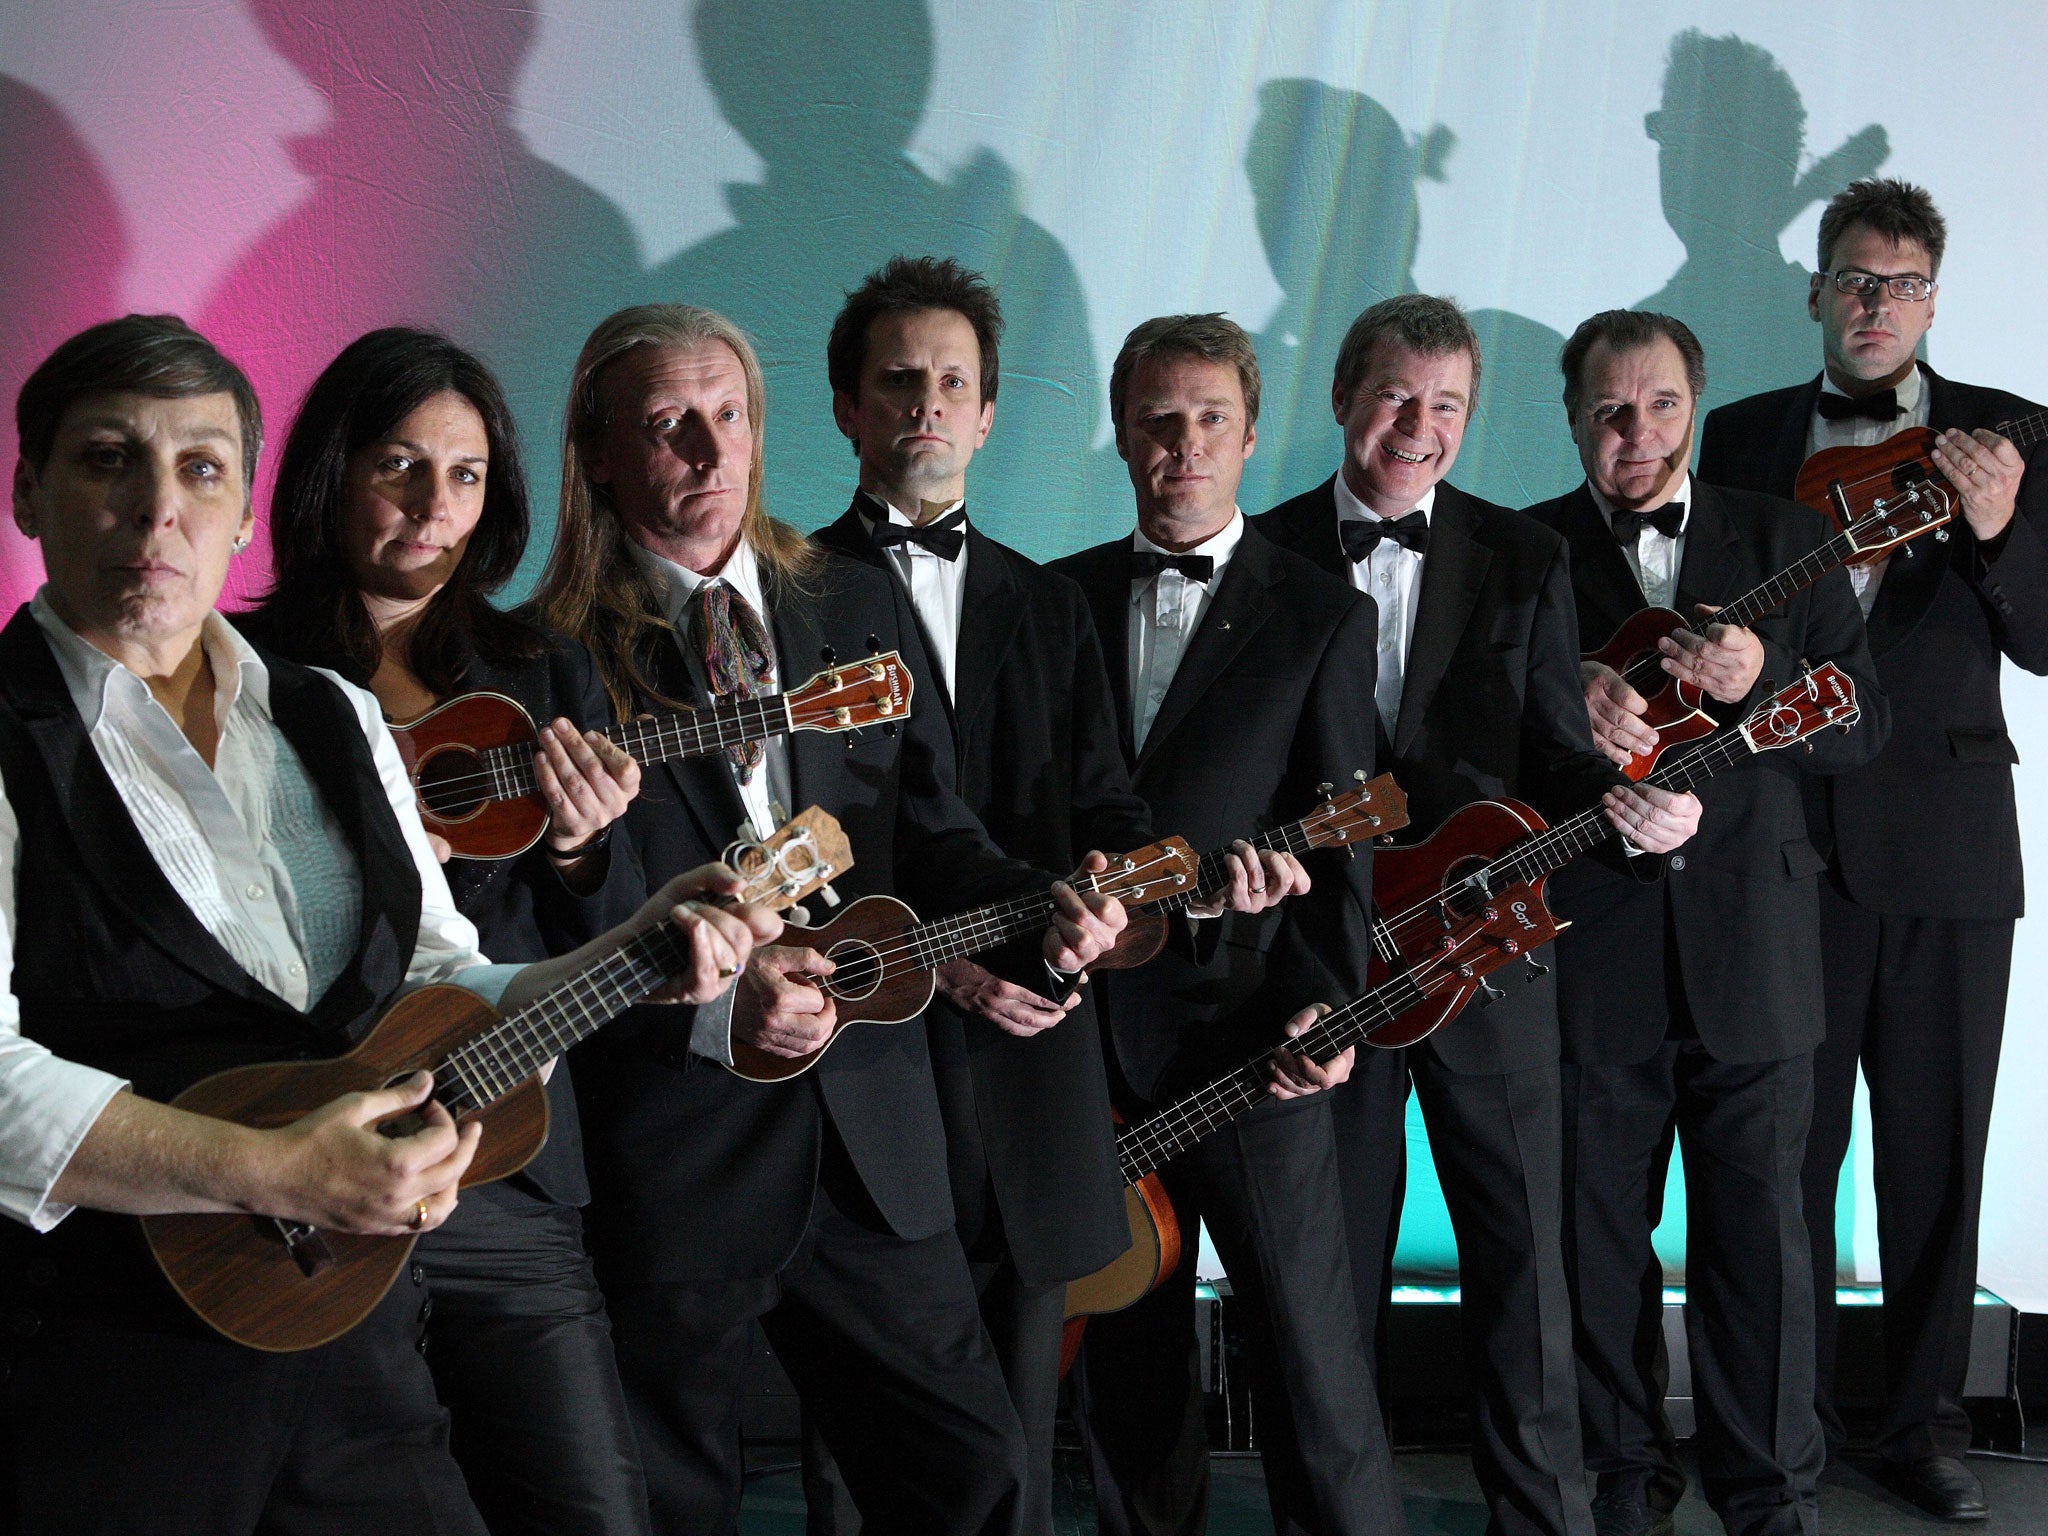 The Ukulele Orchestra of Great Britain in 2008